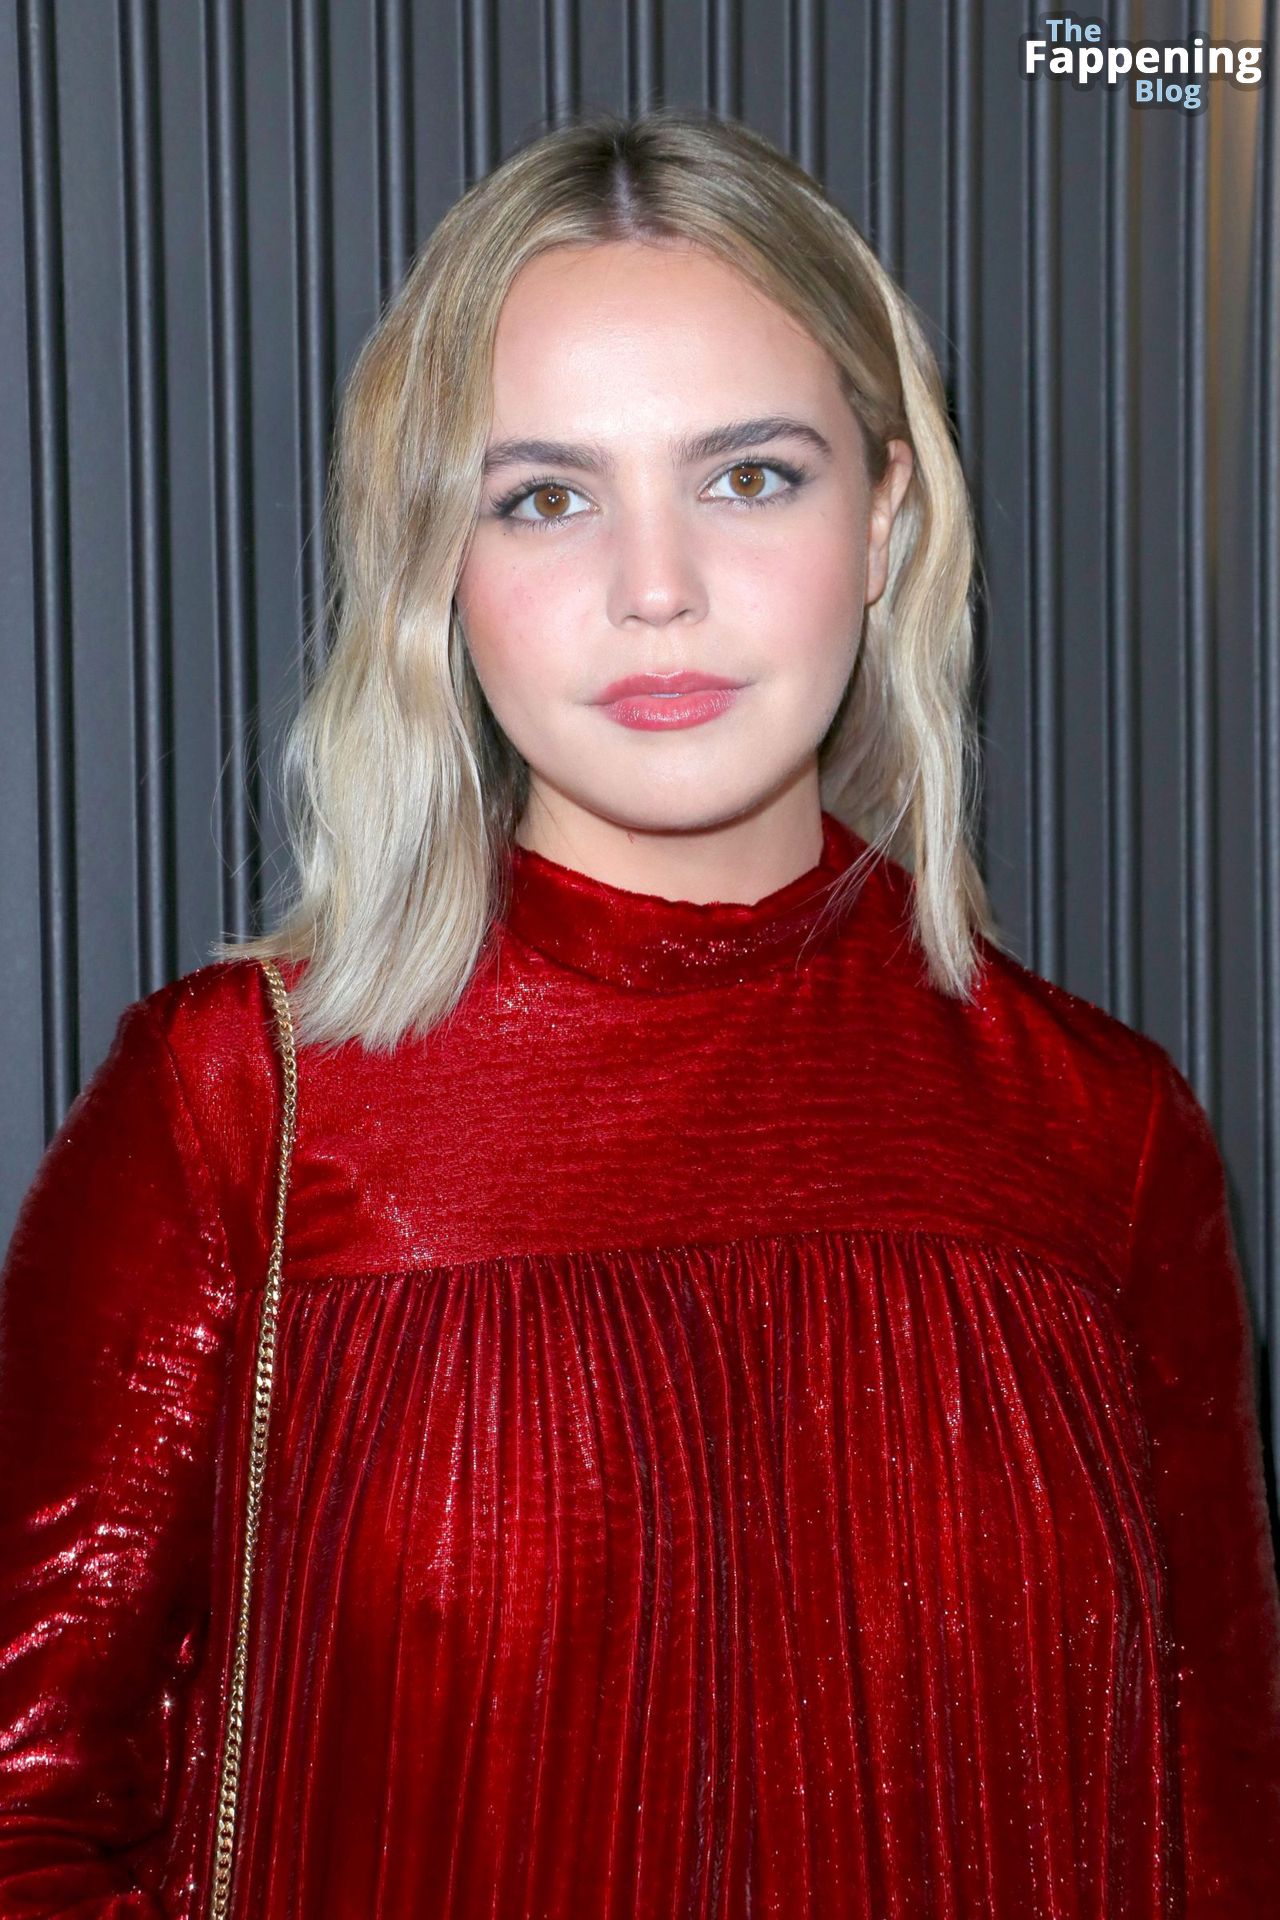 Bailee Madison Looks Hot as She Attends the Vanity Fair’s A Night for Young Hollywood Event in LA (70 Photos)